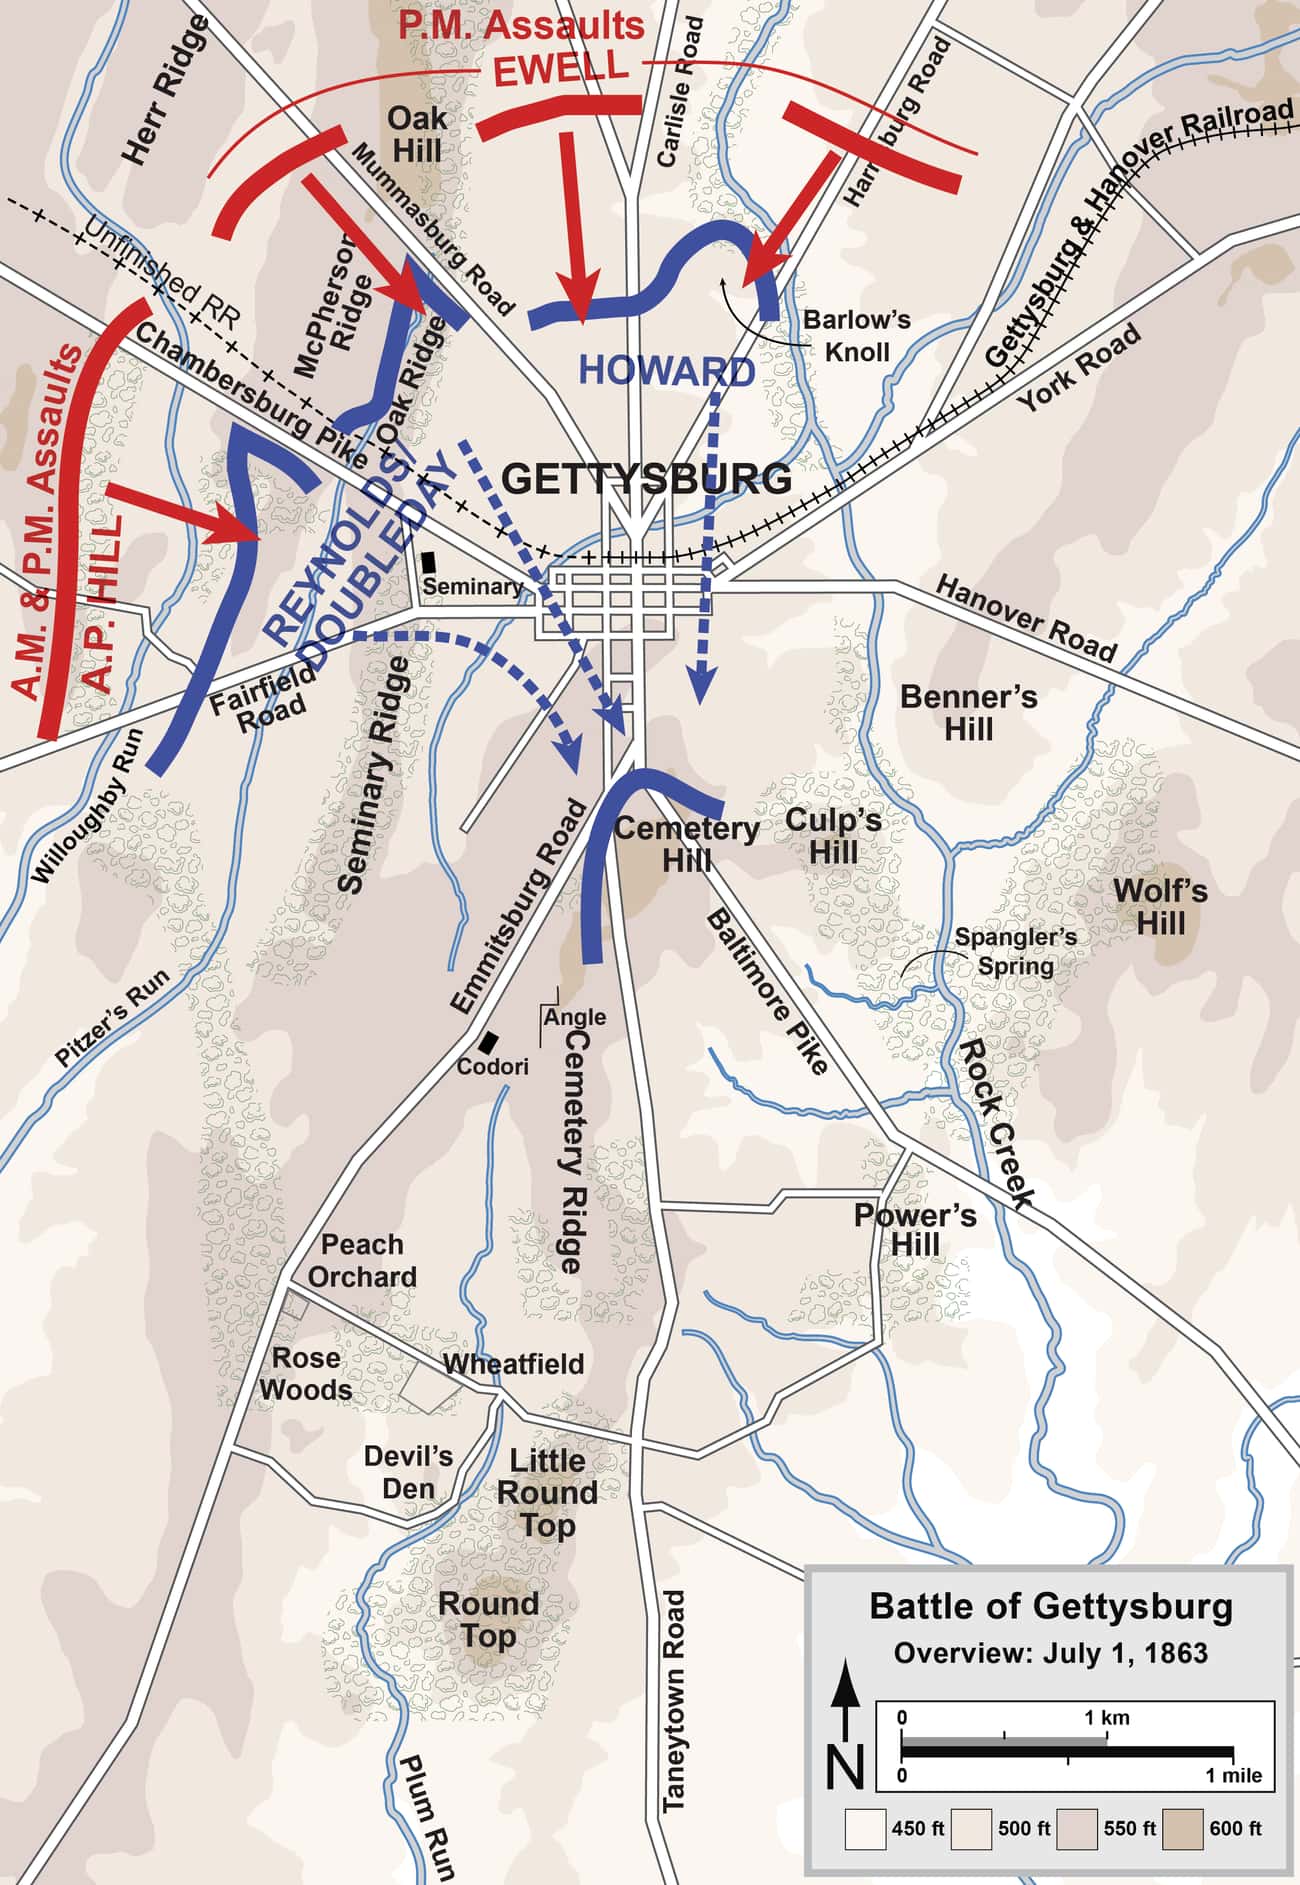 When The Union Troops Retreated To Cemetery Hill On Day 1, Ewell Did Not Pursue Them